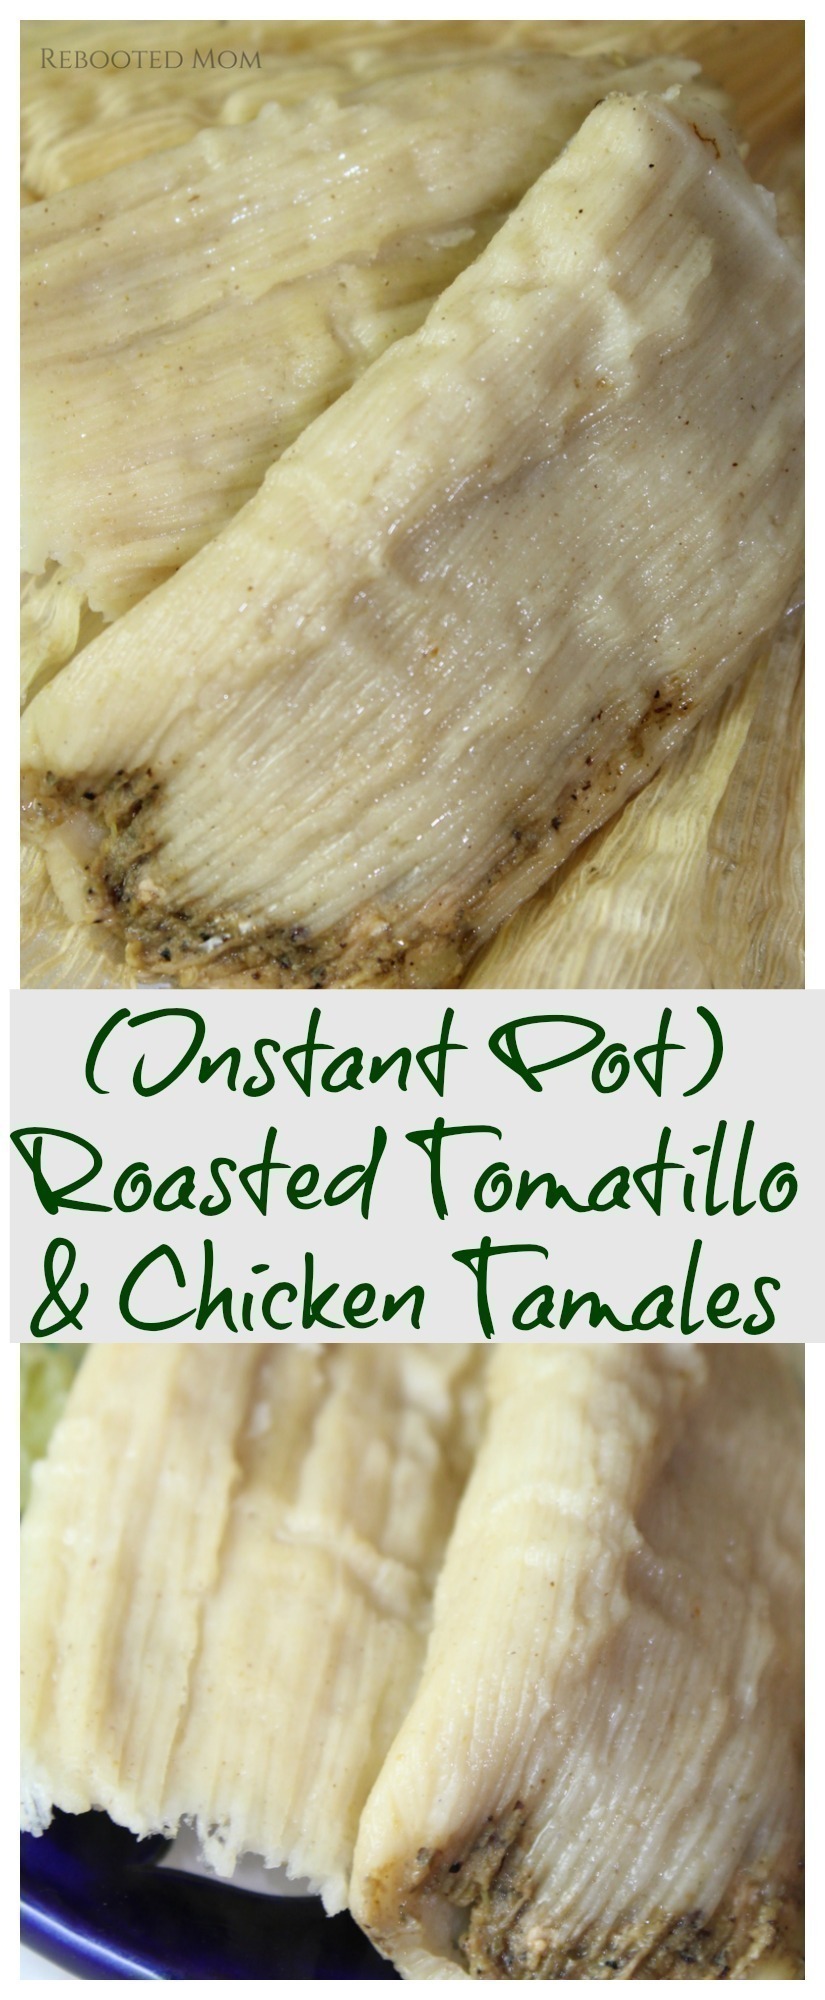 Everyone loves tamales at the holidays! These roasted tomatillo and chicken tamales come together quickly and easily in the Instant Pot!